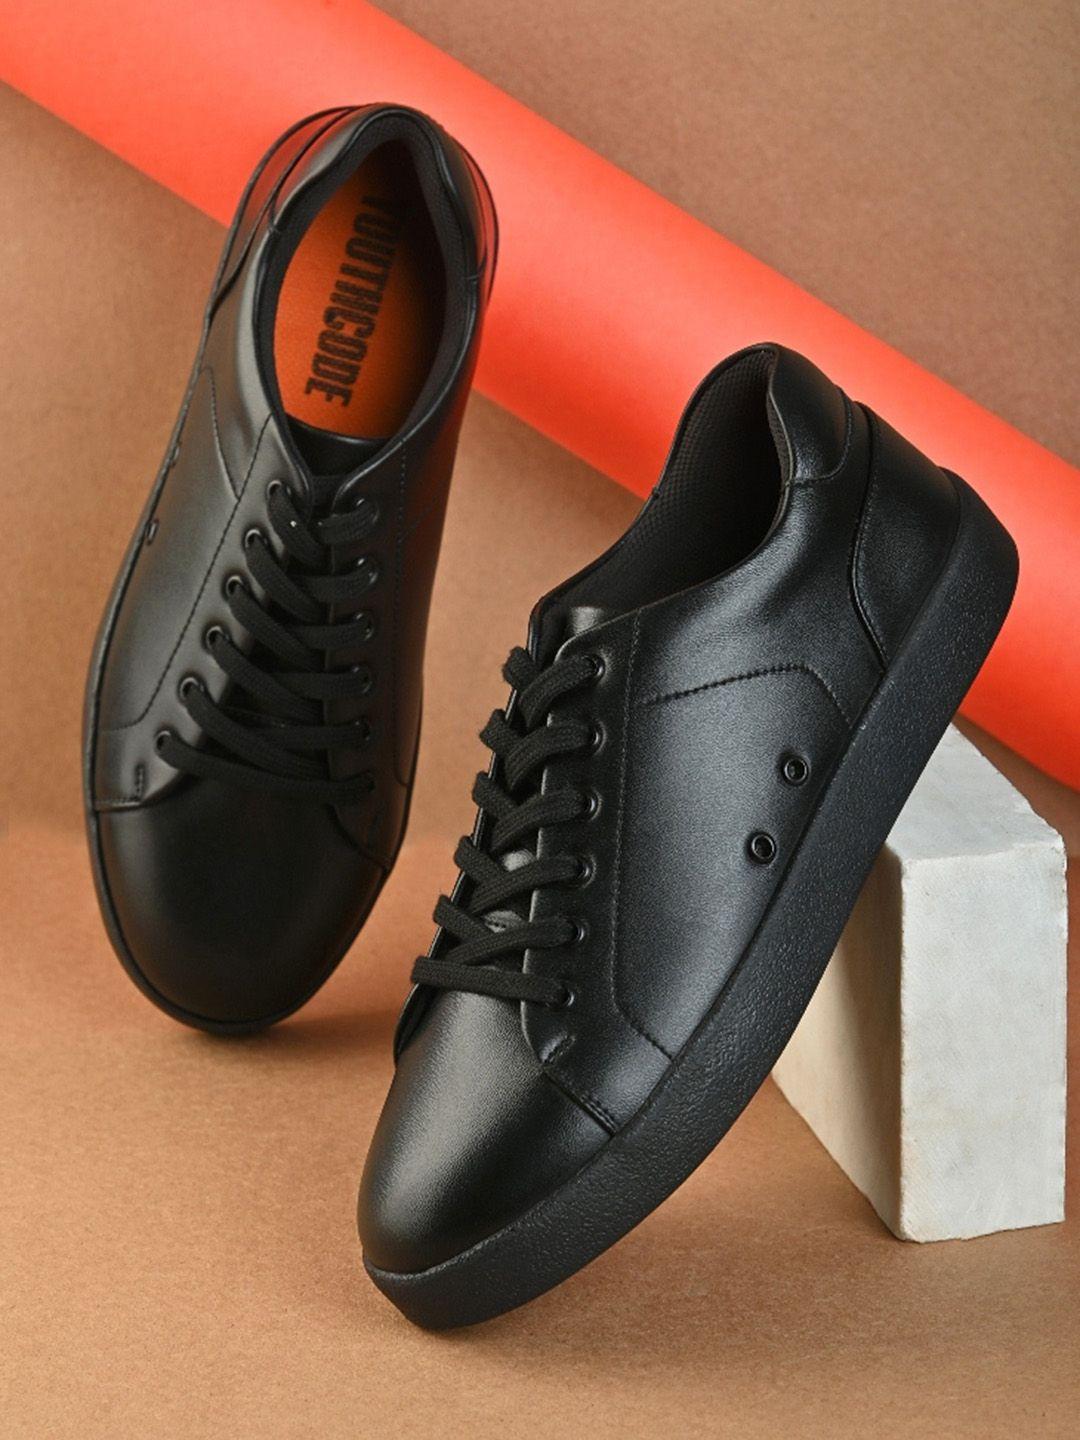 hrx by hrithik roshan men lace-up sneakers